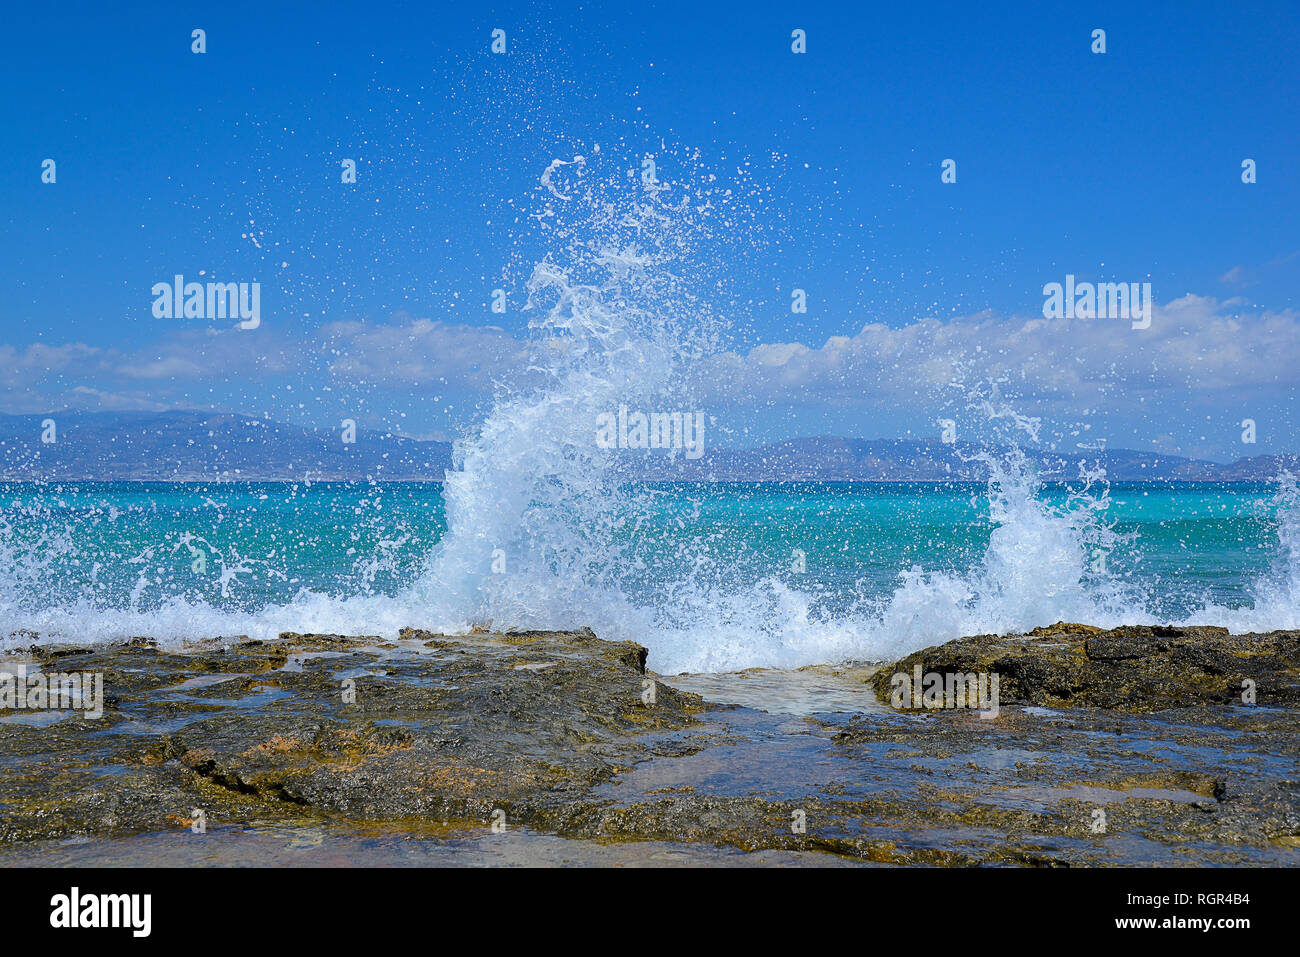 shore of large stone slabs, high splashing waves, blue sea, in the distance Crete island Stock Photo